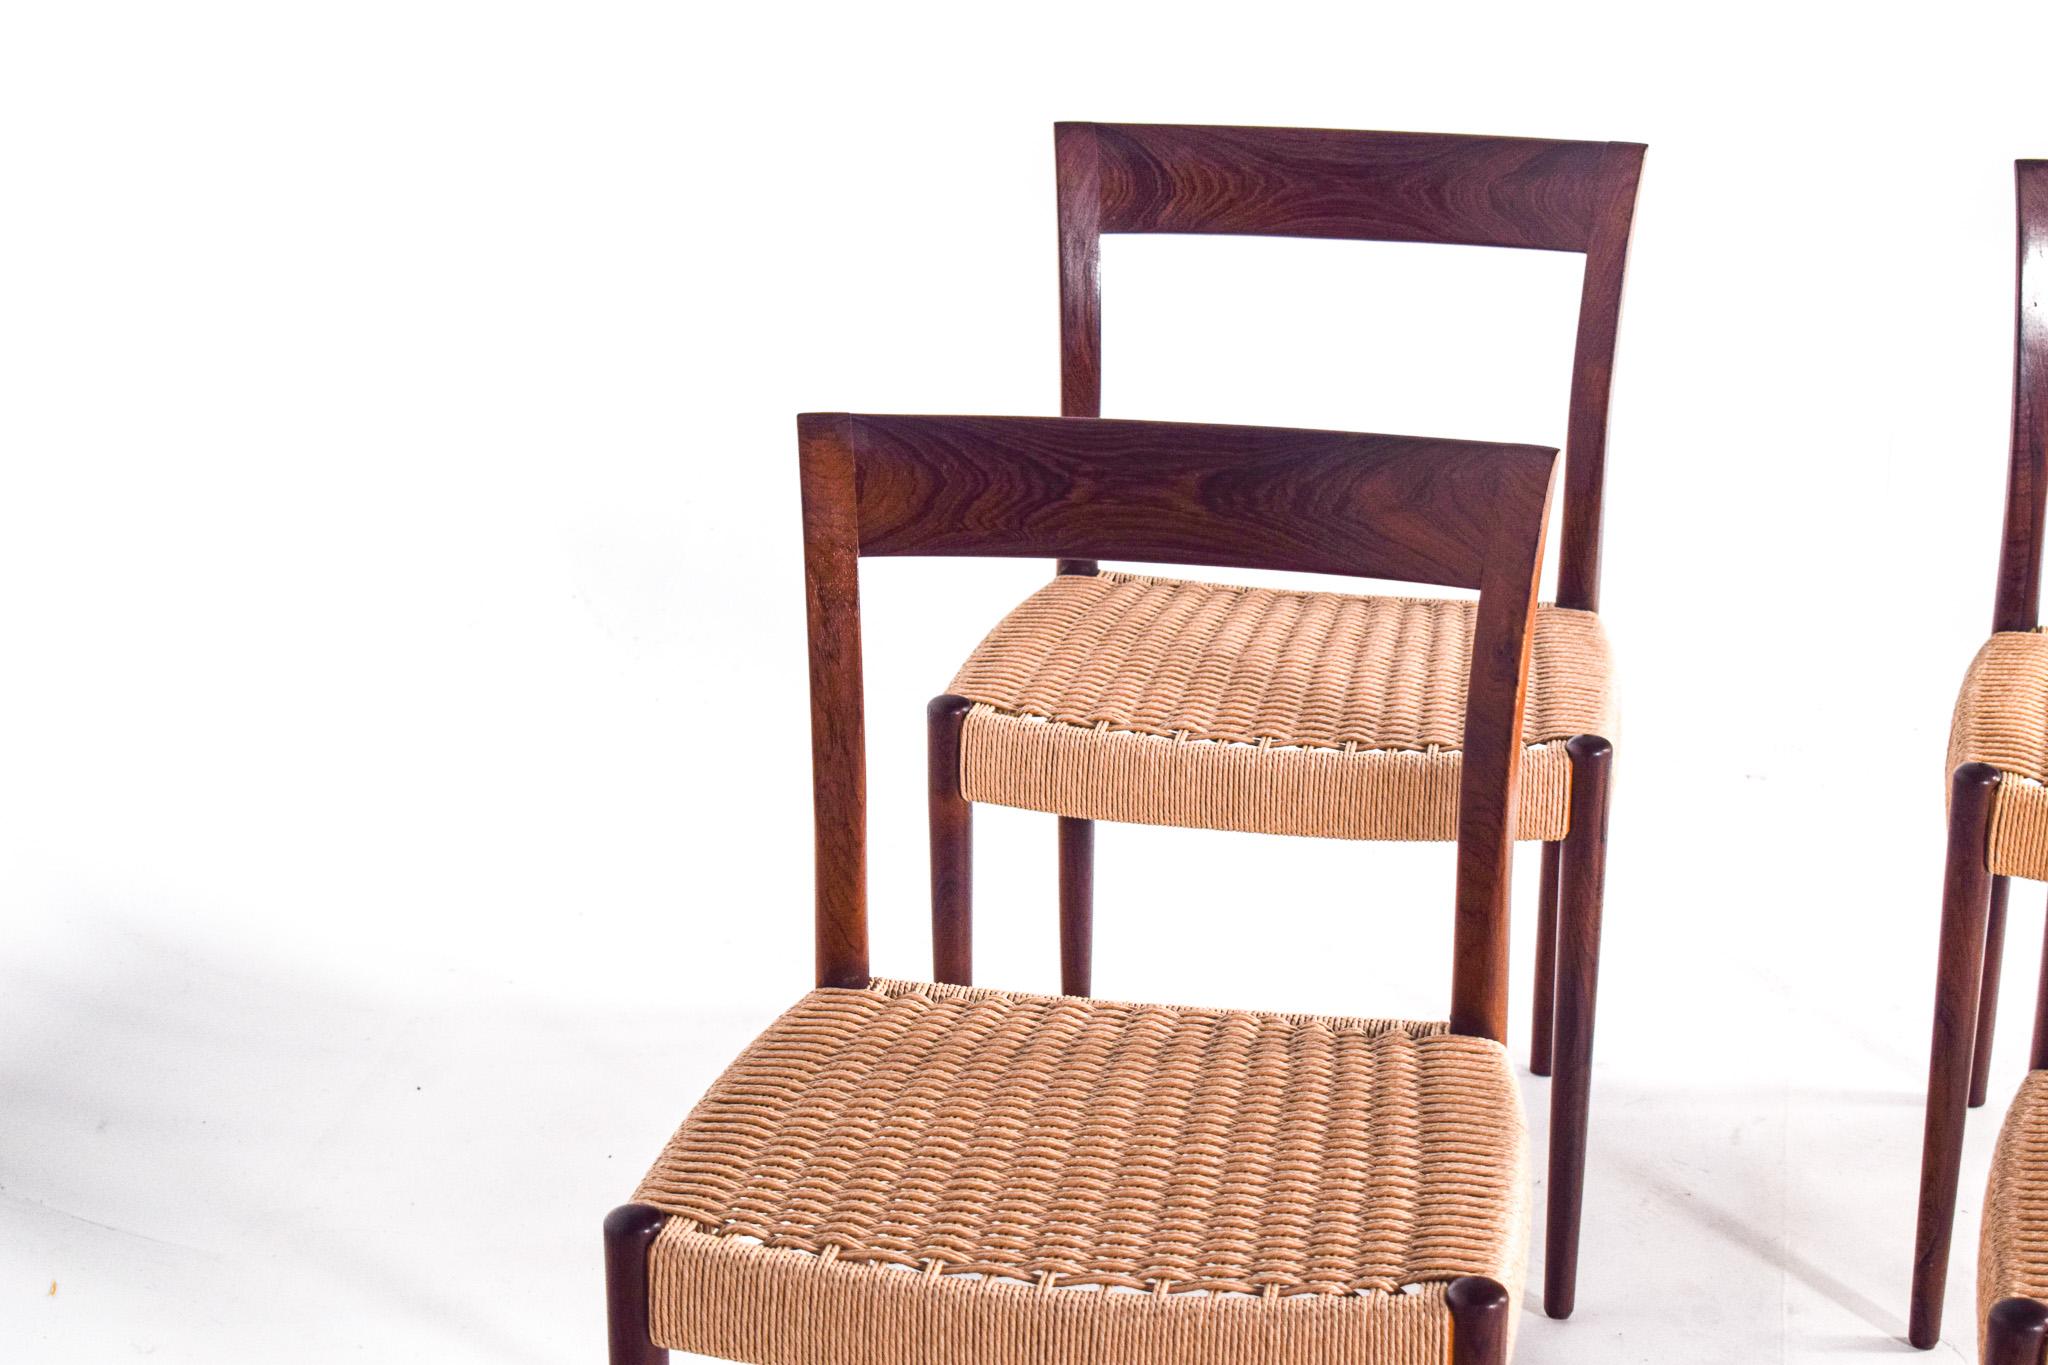 This set of six dining chairs from the 1960s, designed by Søren Willadsen, exhibits the finesse of Danish craftsmanship and design ethos from the mid-20th century. The rosewood construction imparts a robust and high-quality feel, and over time, the